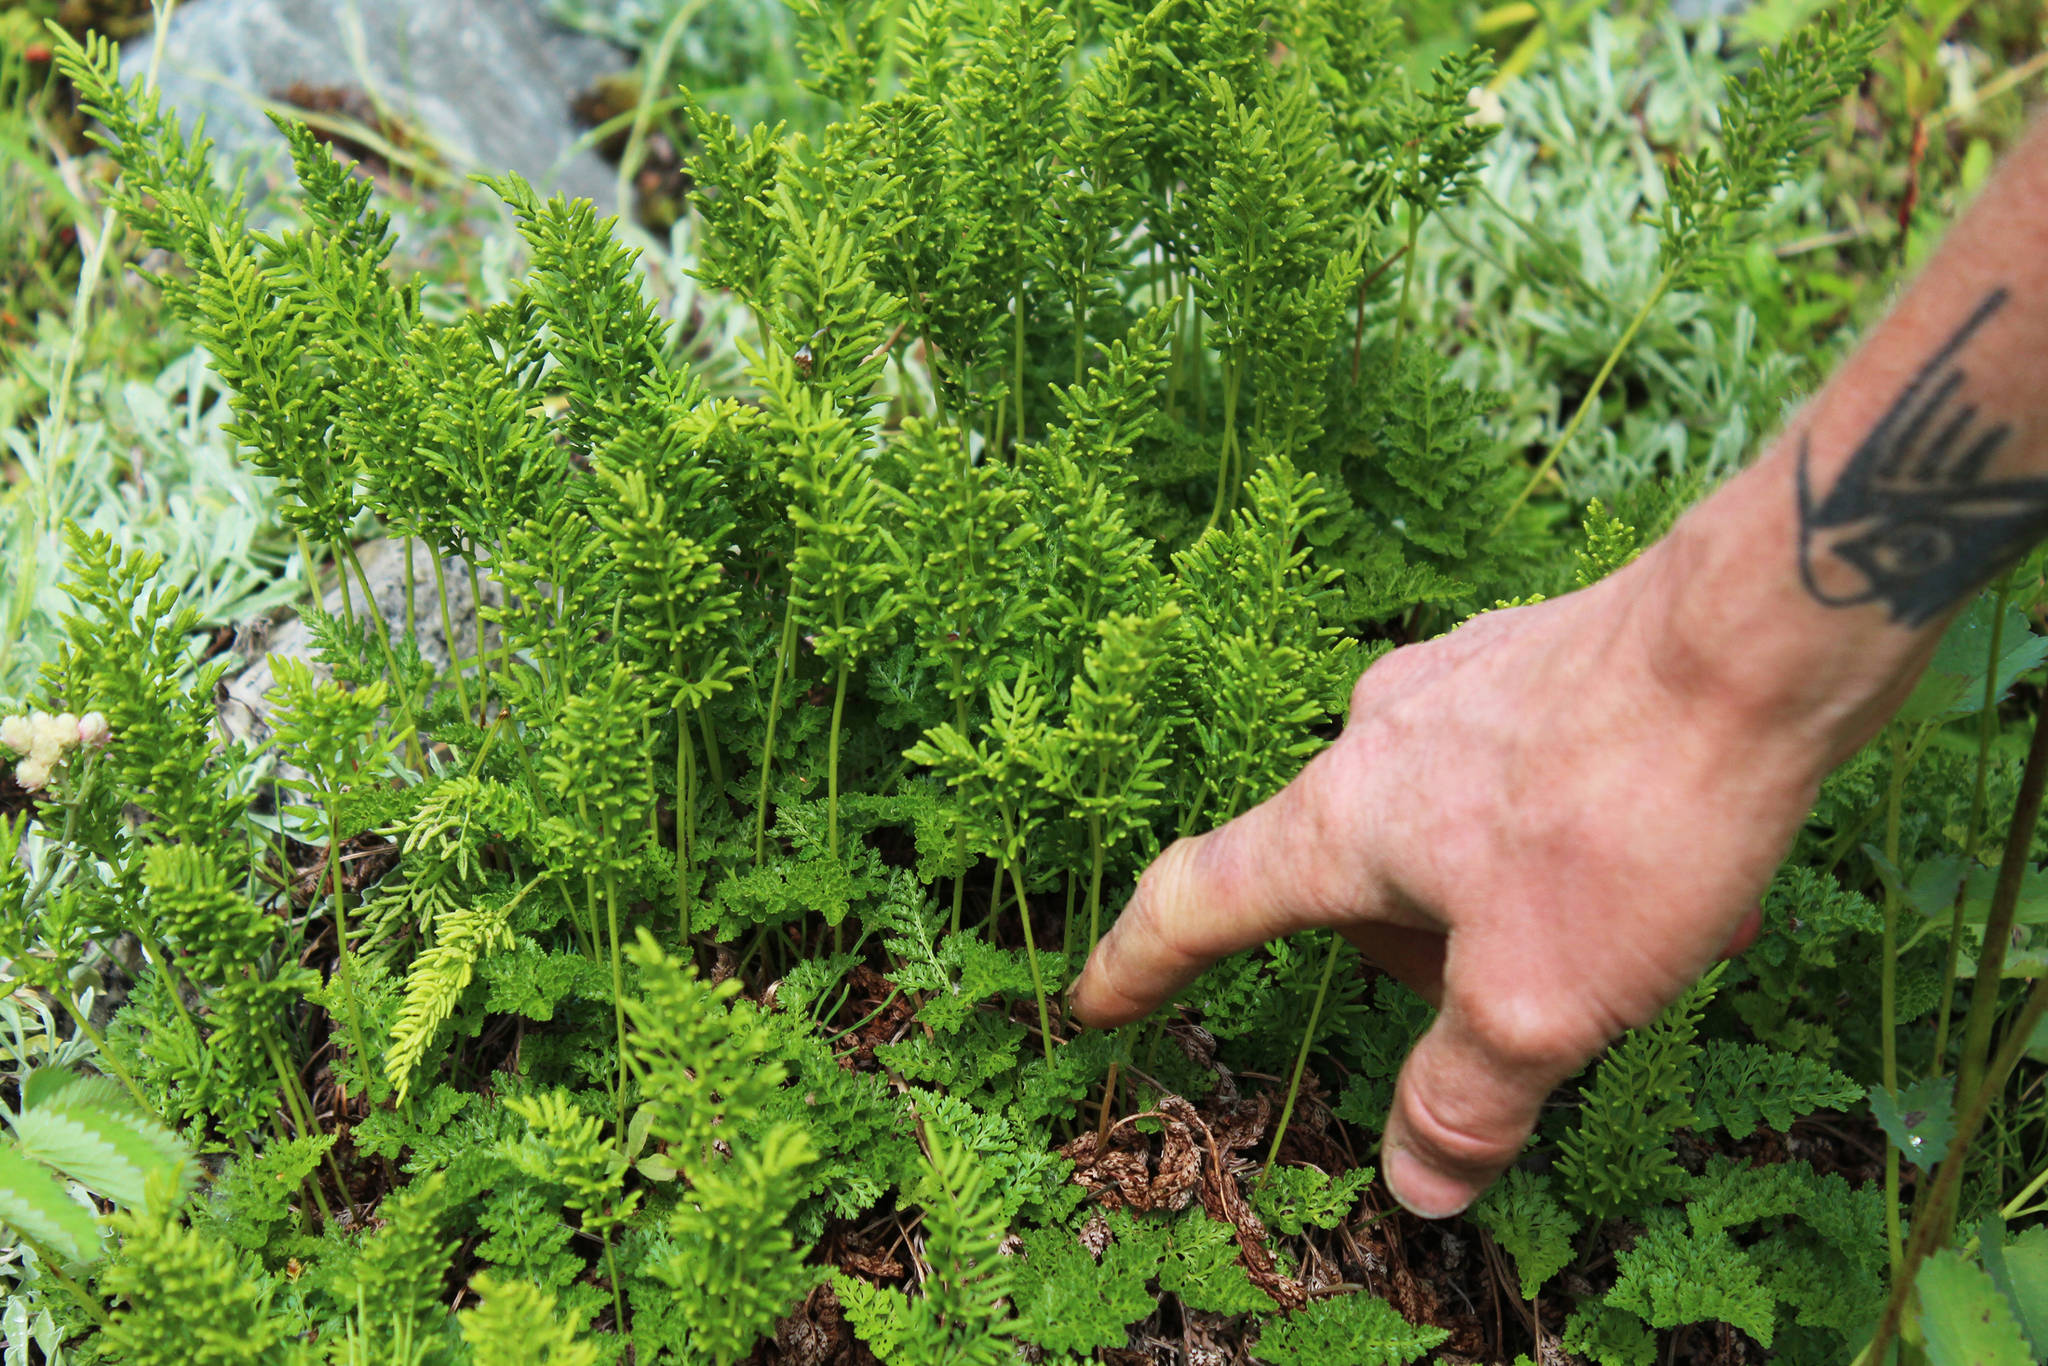 Yarrow Hinnant, the new gardener for the Pratt Museum, points out a unique fern while working in the garden Thursday, July 12, 2018 in Homer, Alaska. (Photo by Megan Pacer/Homer News)